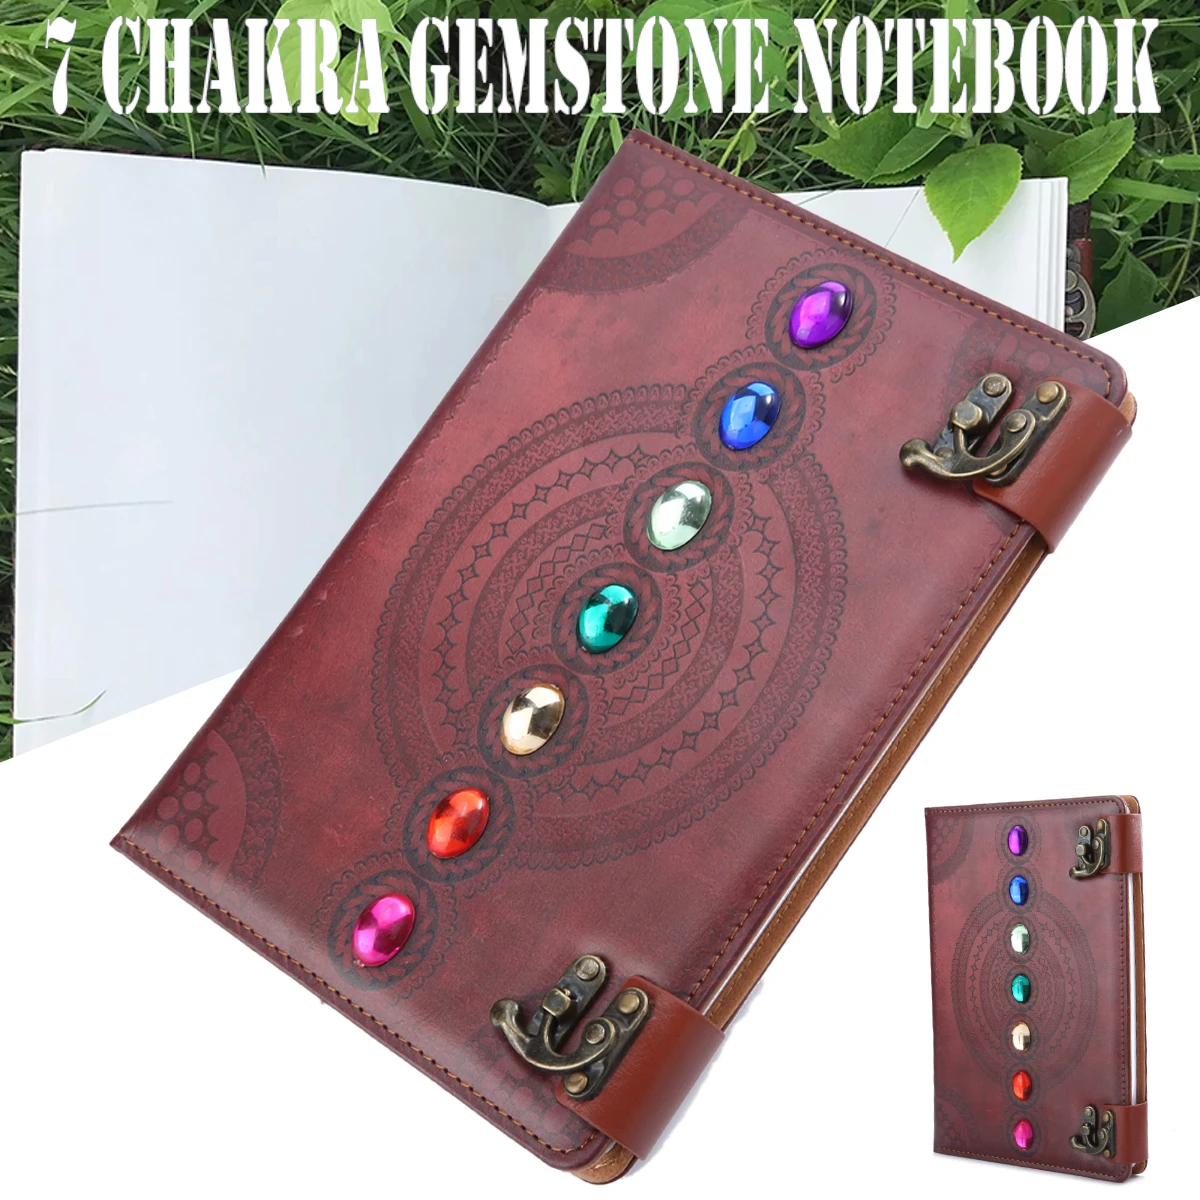 New Arrival Diary Weekly Planner Notebook Chakra Gemstone Leather Work Study Plan Notepad Journal Notebook Stationery